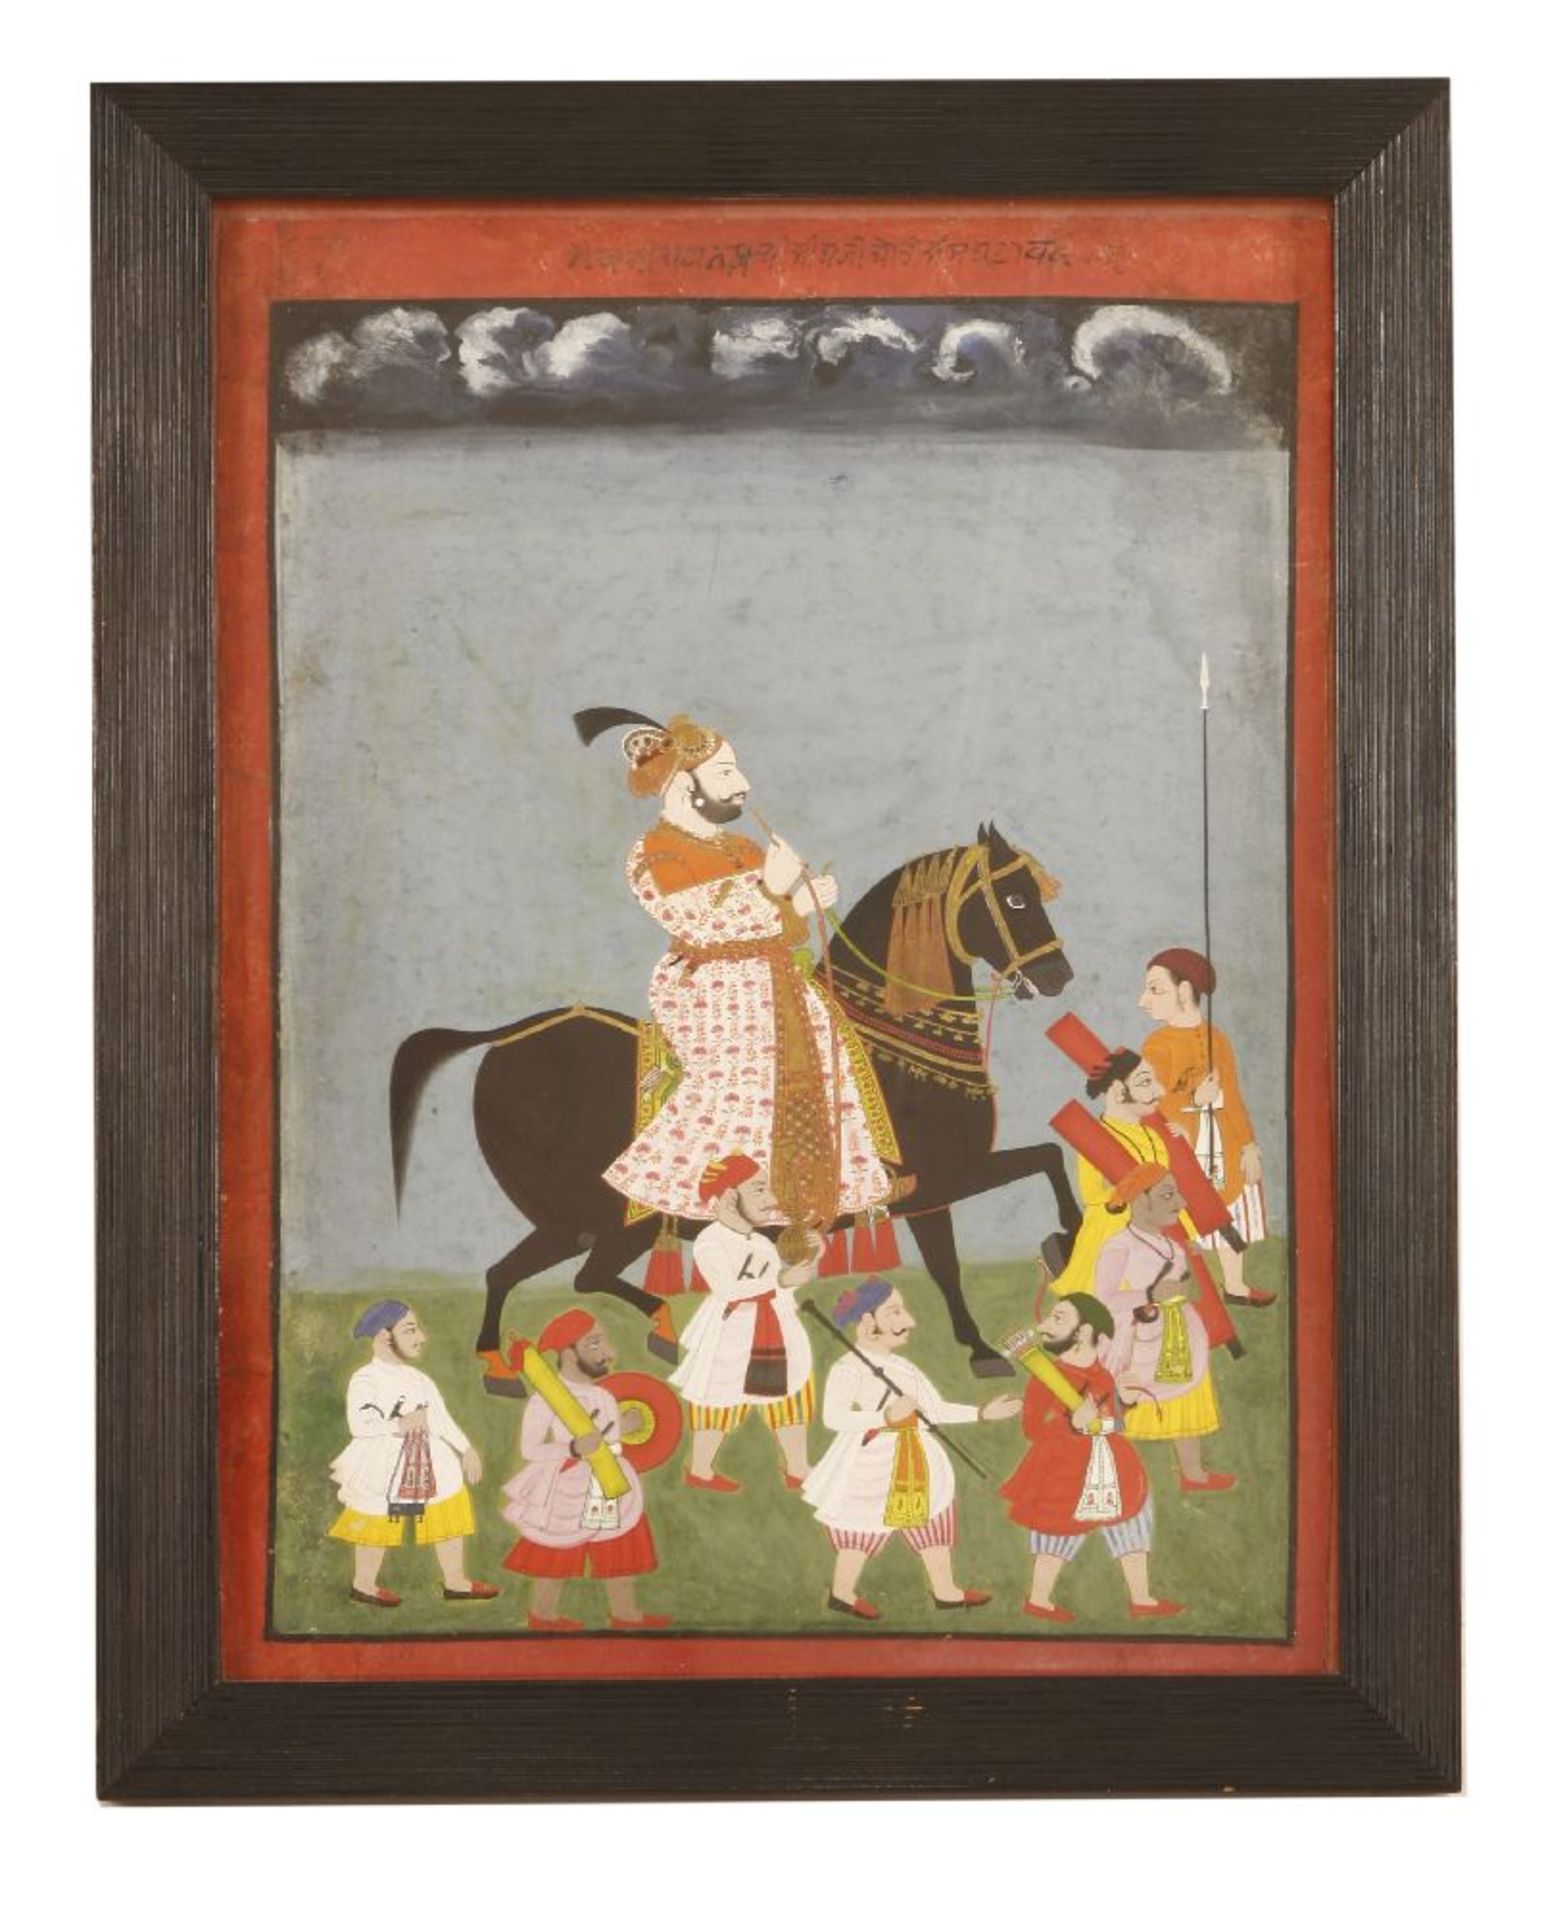 A portrait of Maharaja Prithvi Singh,19th century, depicting him seated on horseback, with